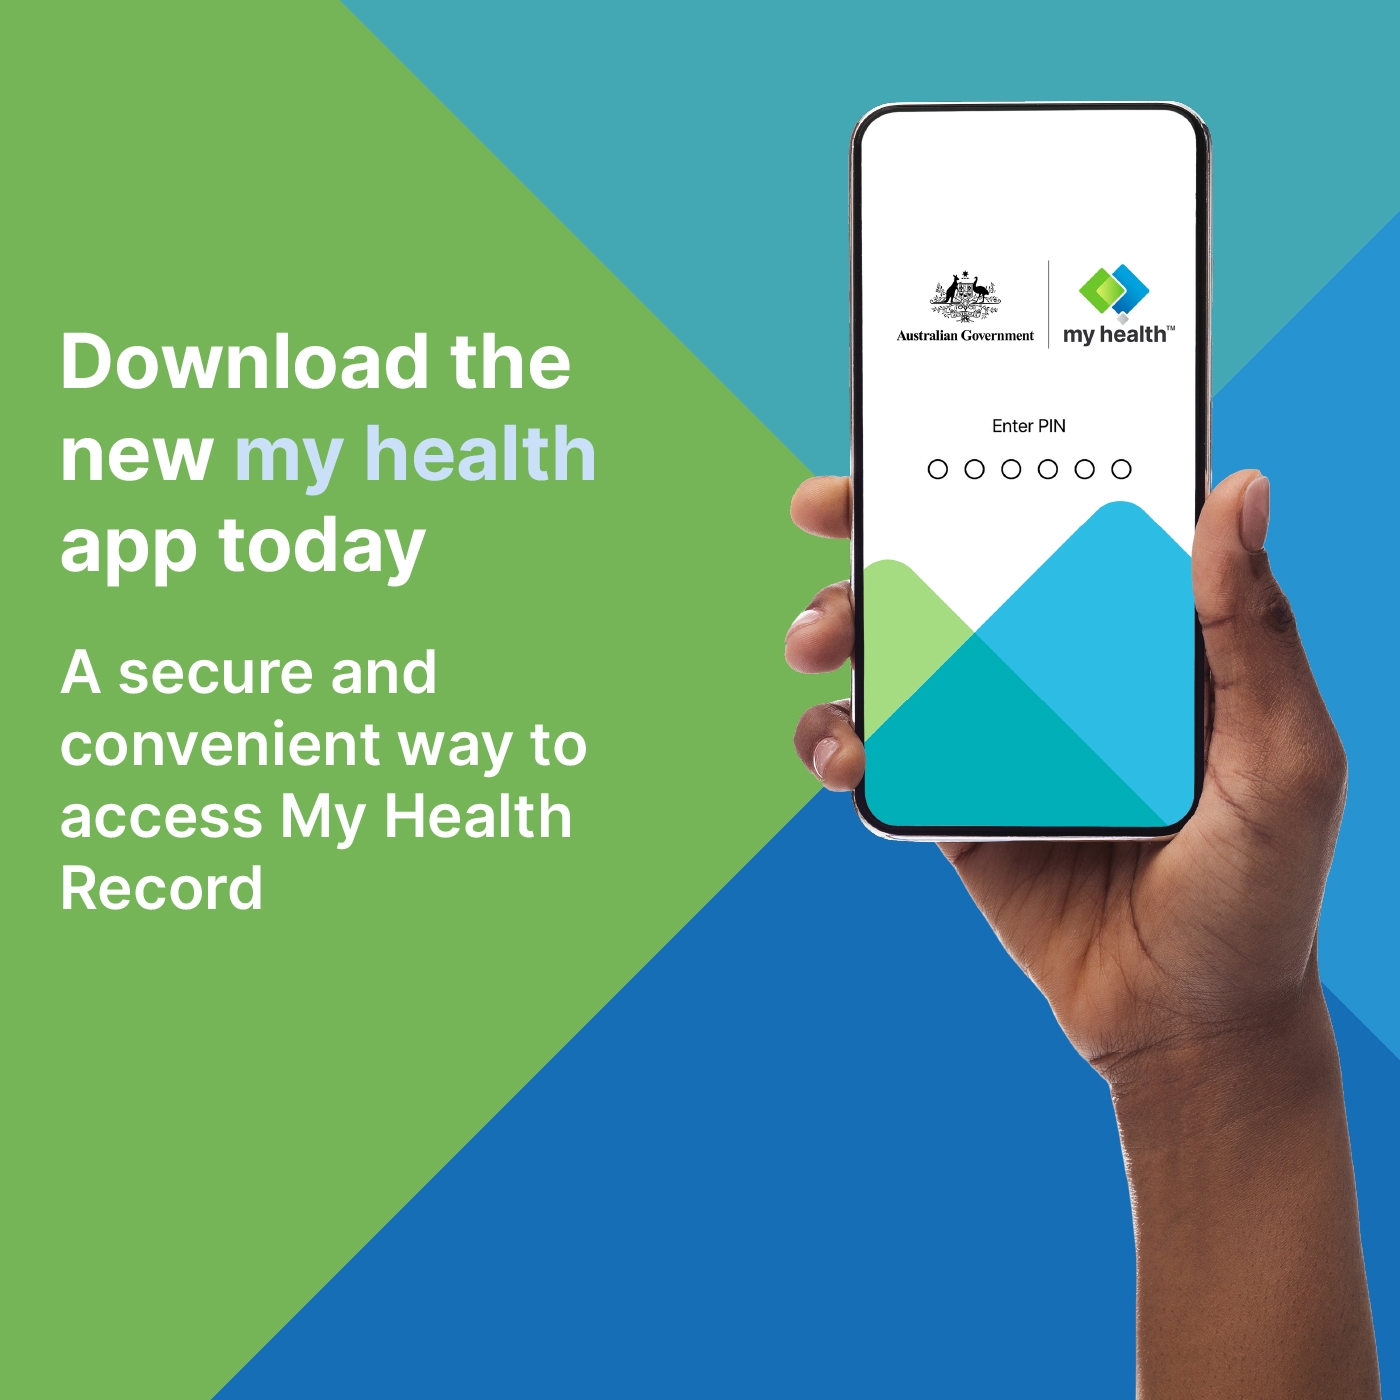 The new my health app is now live